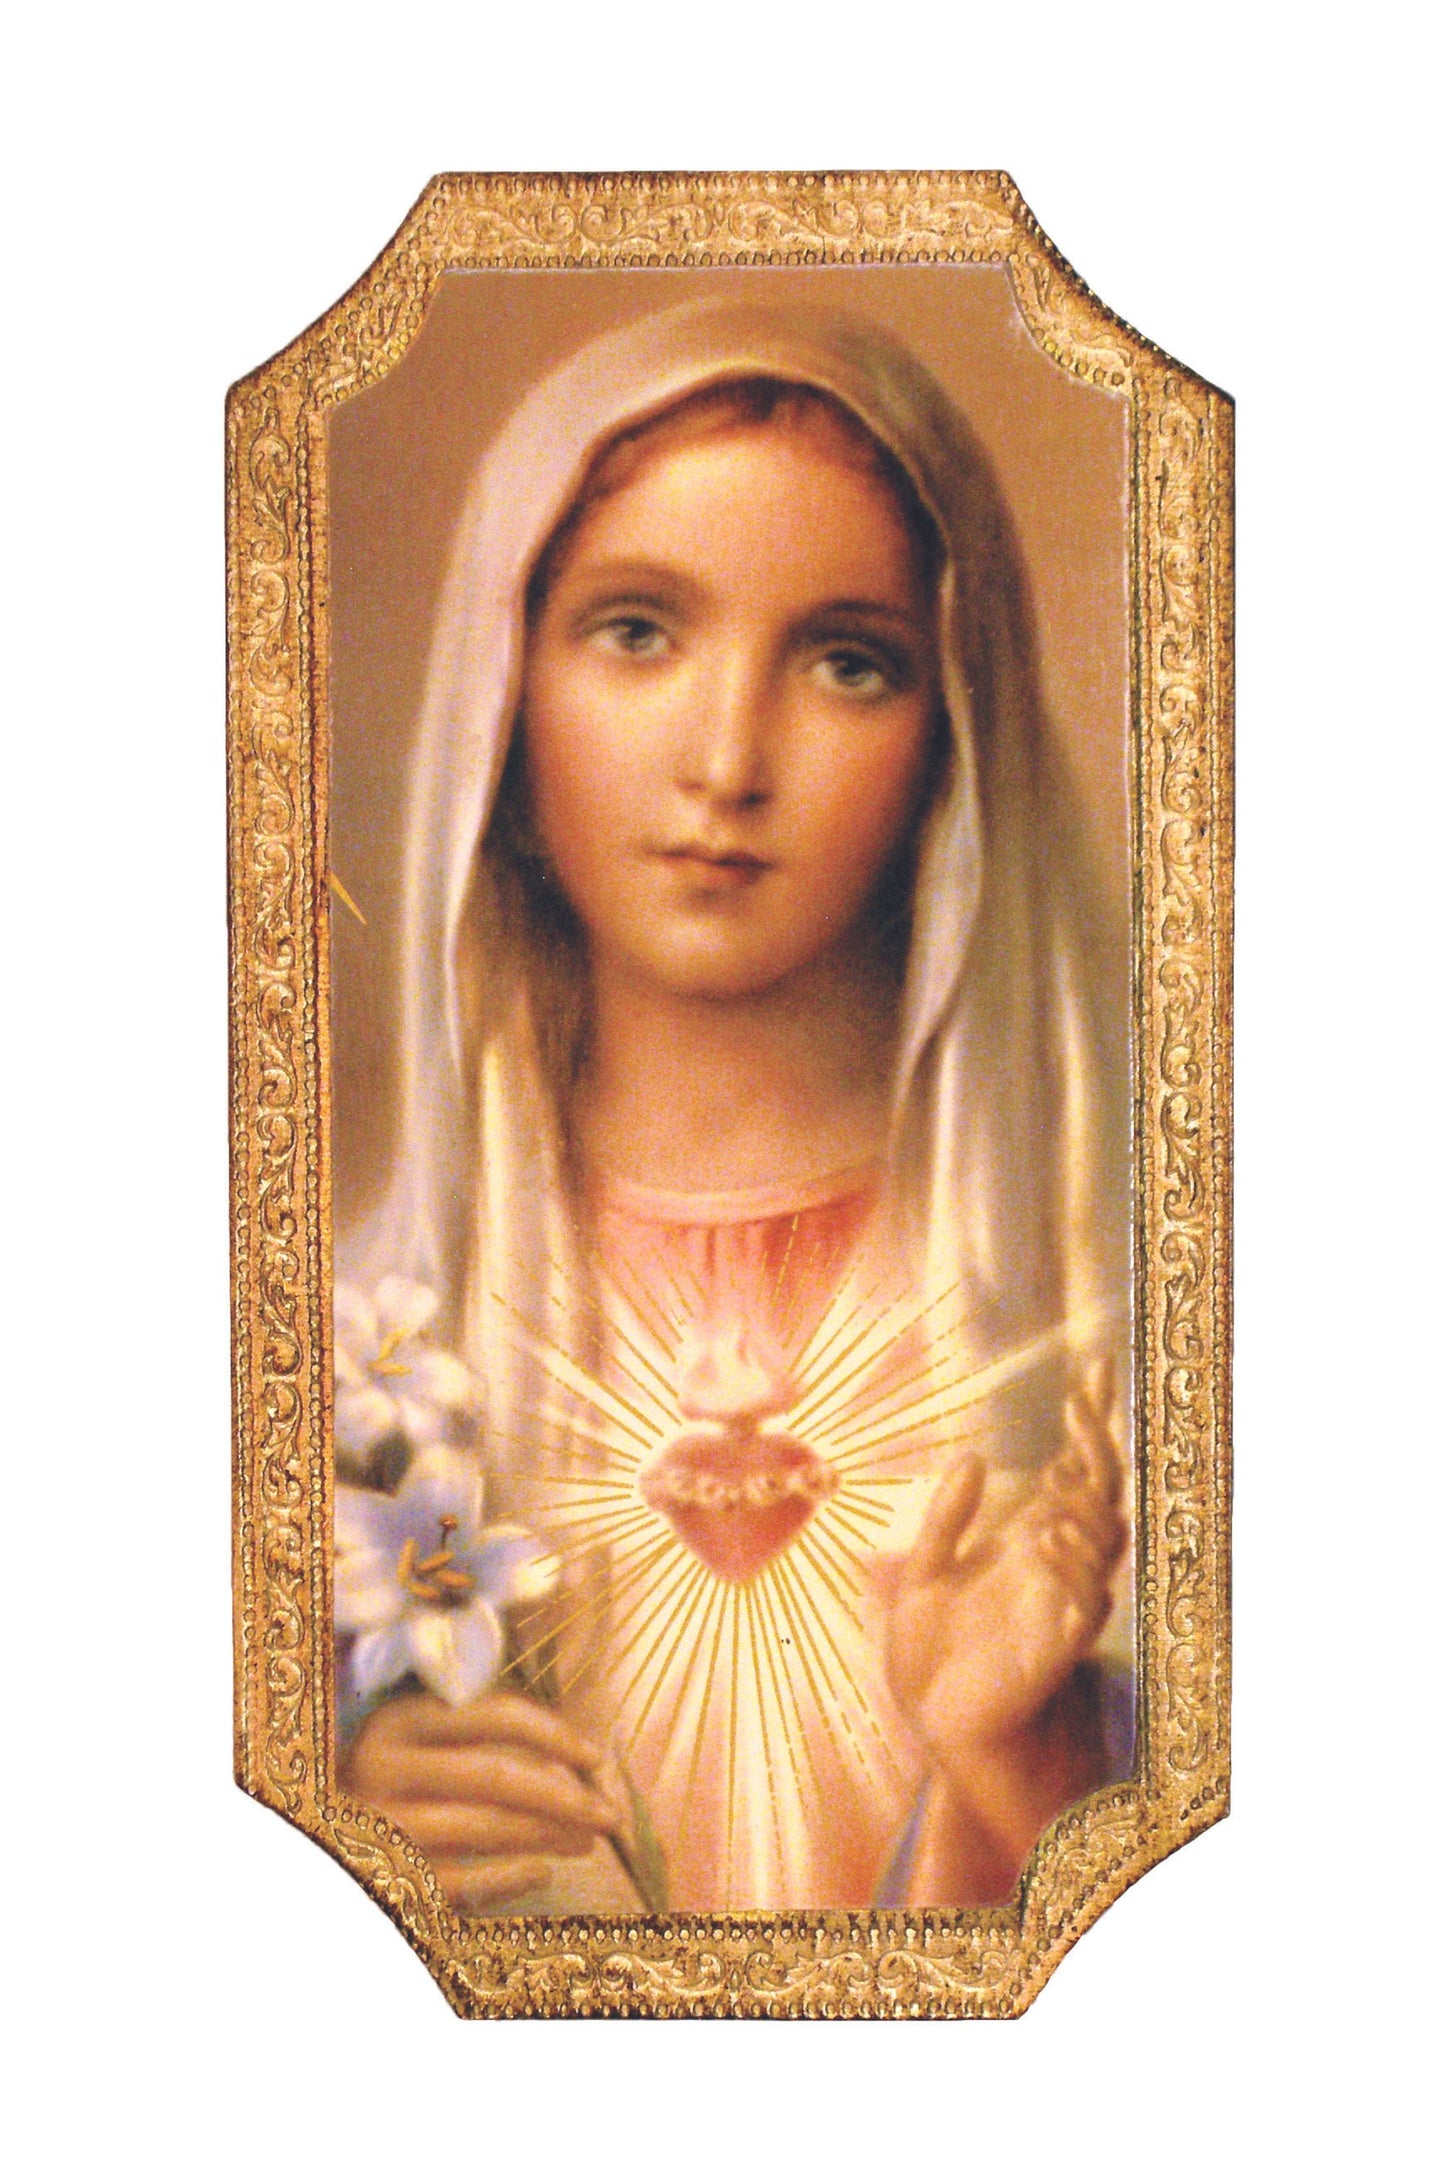 L-272 Immaculate Heart of Mary Florentine Plaque 4.75x9"